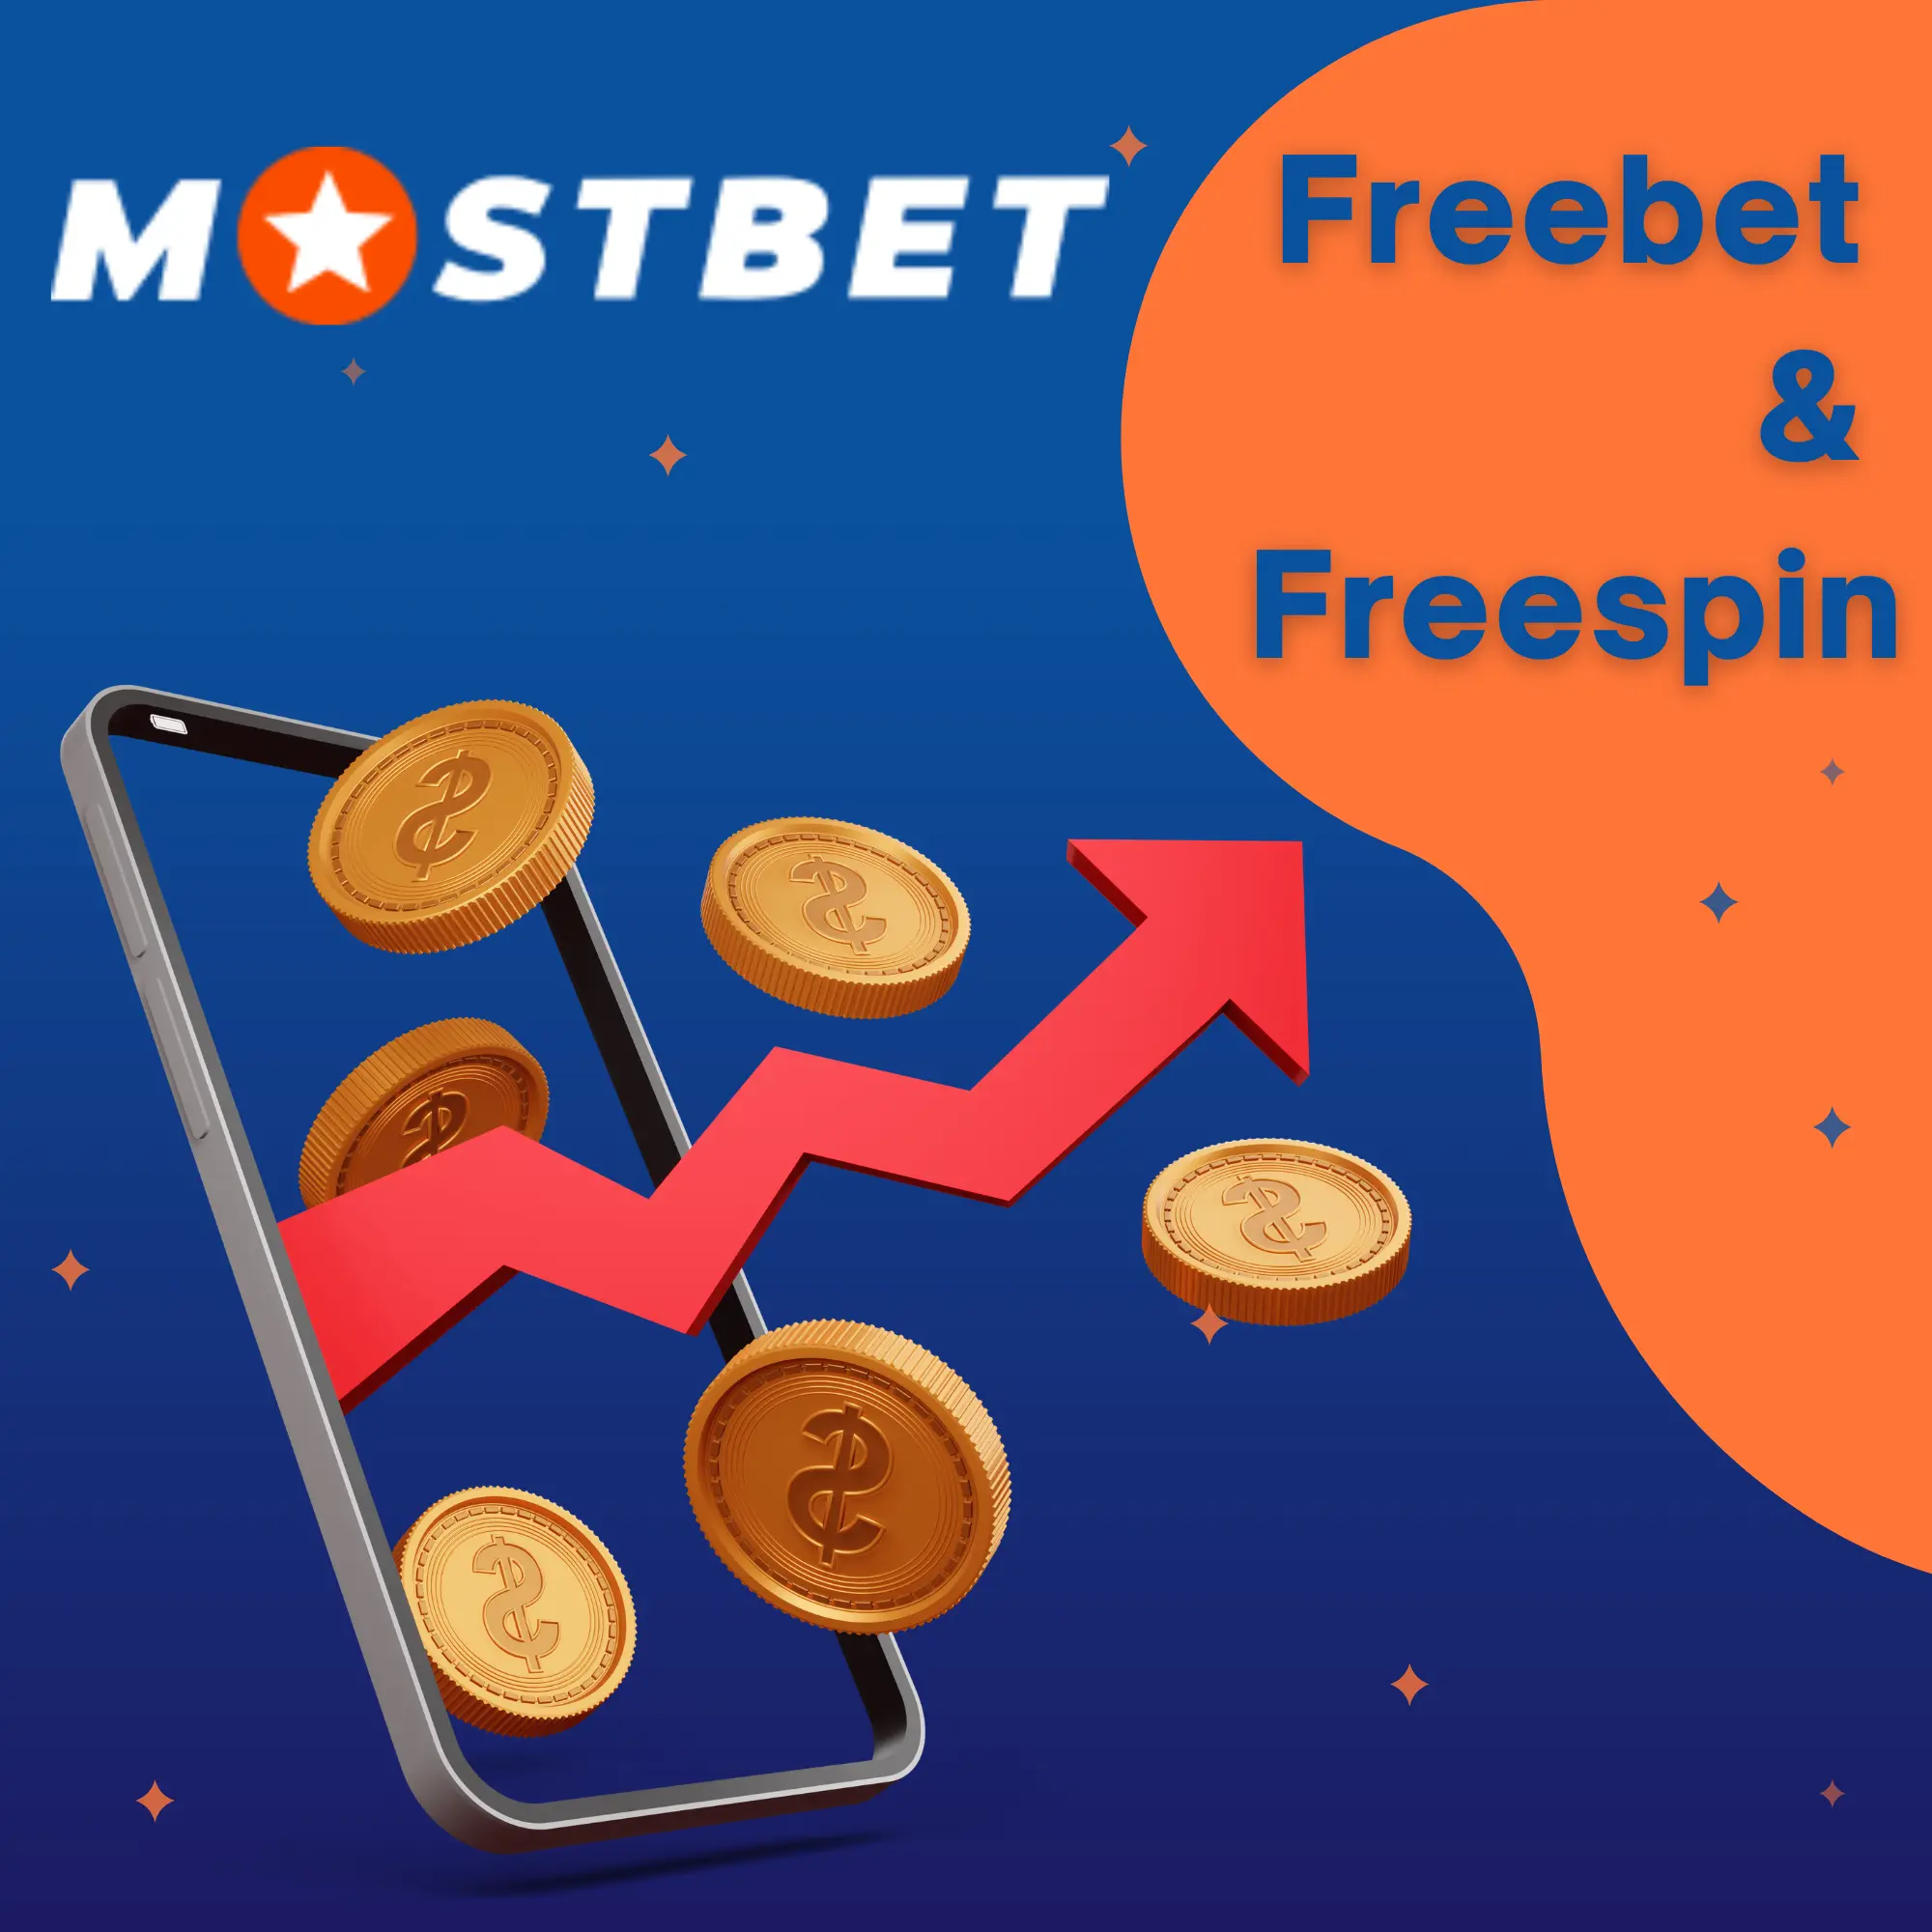 How to Use a Free Bet on Mostbet?